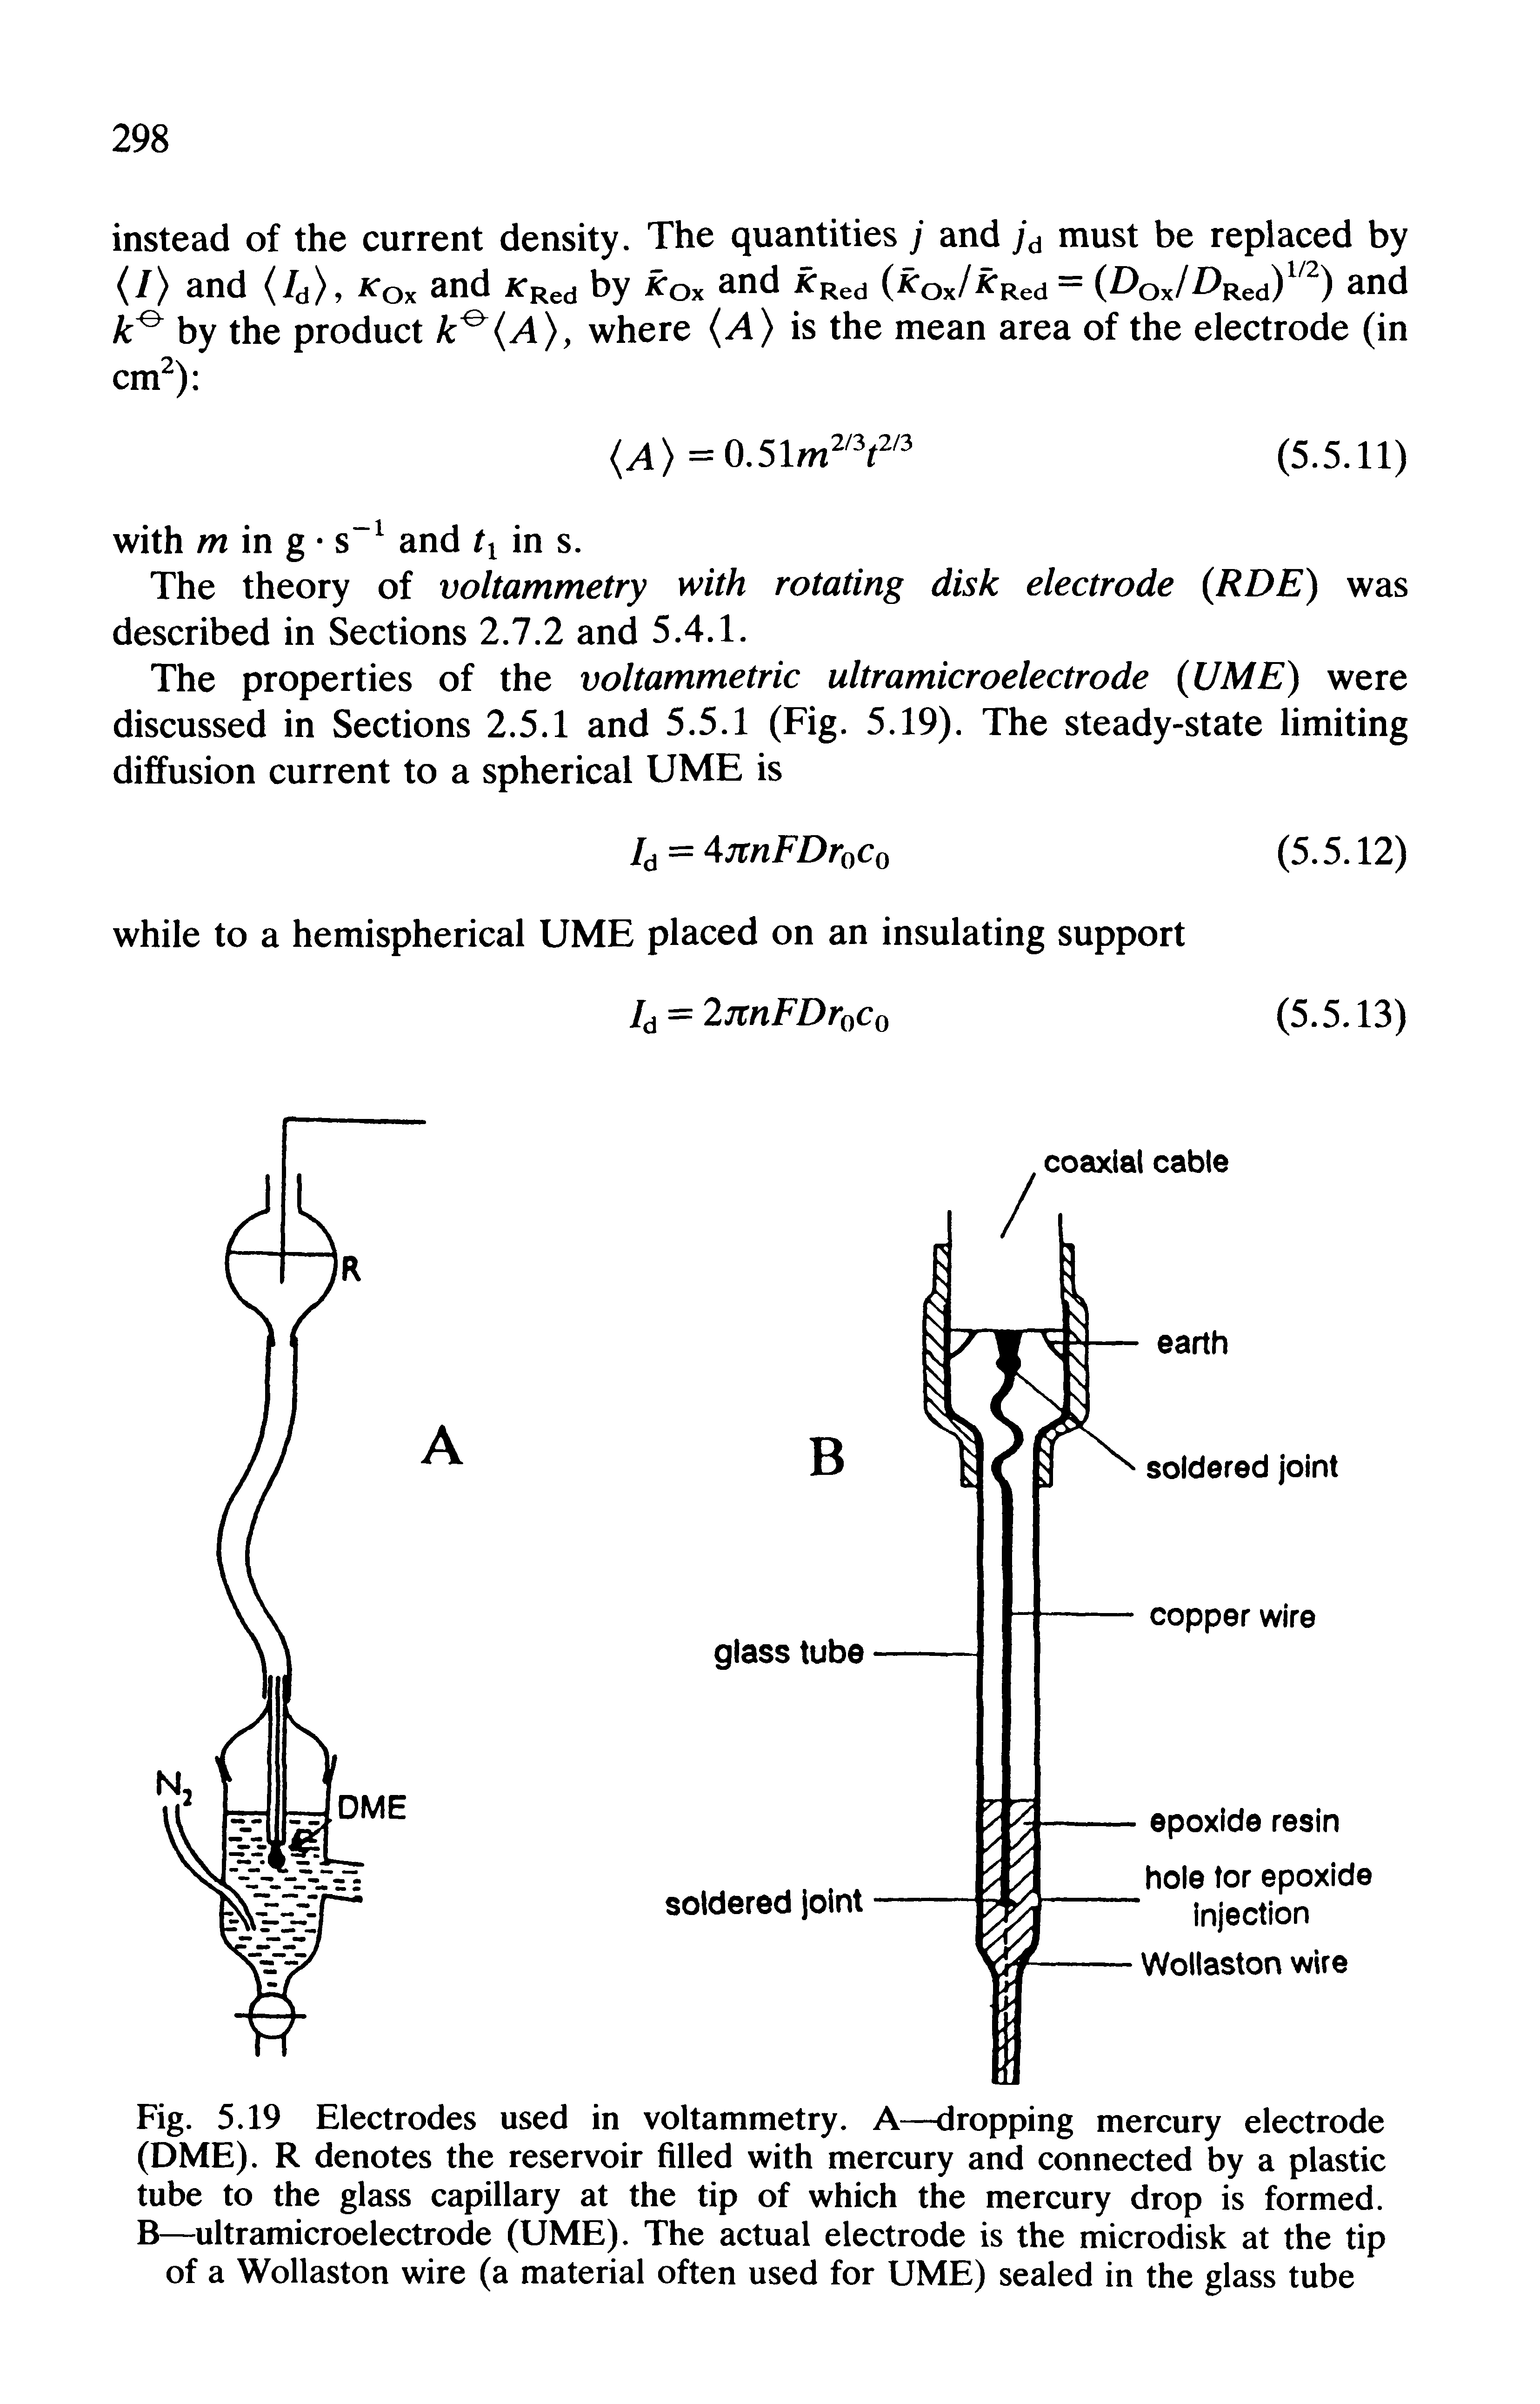 Fig. 5.19 Electrodes used in voltammetry. A—dropping mercury electrode (DME). R denotes the reservoir filled with mercury and connected by a plastic tube to the glass capillary at the tip of which the mercury drop is formed. B—ultramicroelectrode (UME). The actual electrode is the microdisk at the tip of a Wollaston wire (a material often used for UME) sealed in the glass tube...